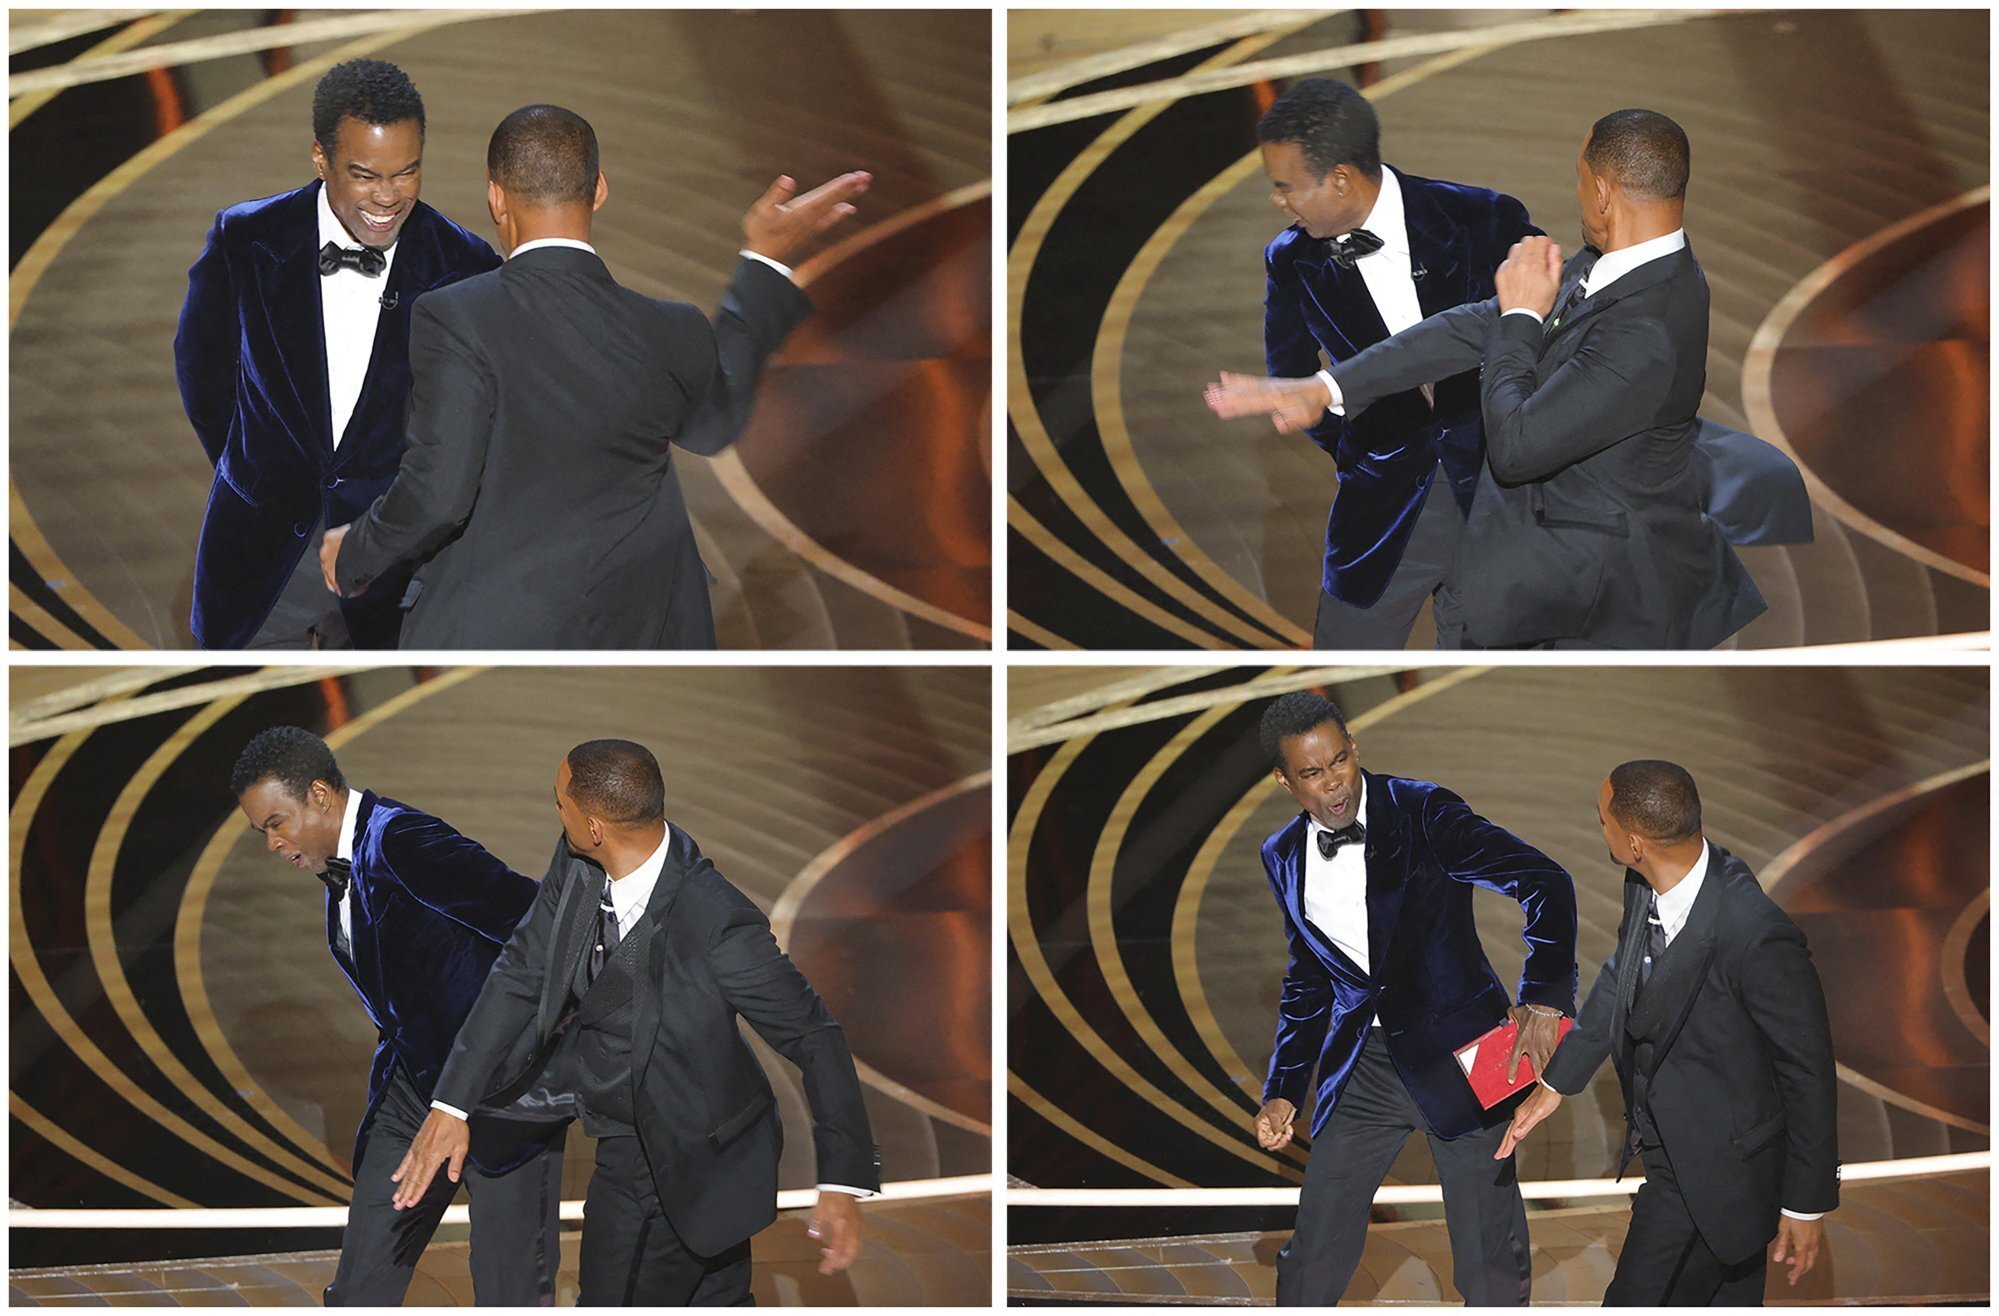 Will Smith hit Chris Rock on stage at the Oscars. Photo: Reuters